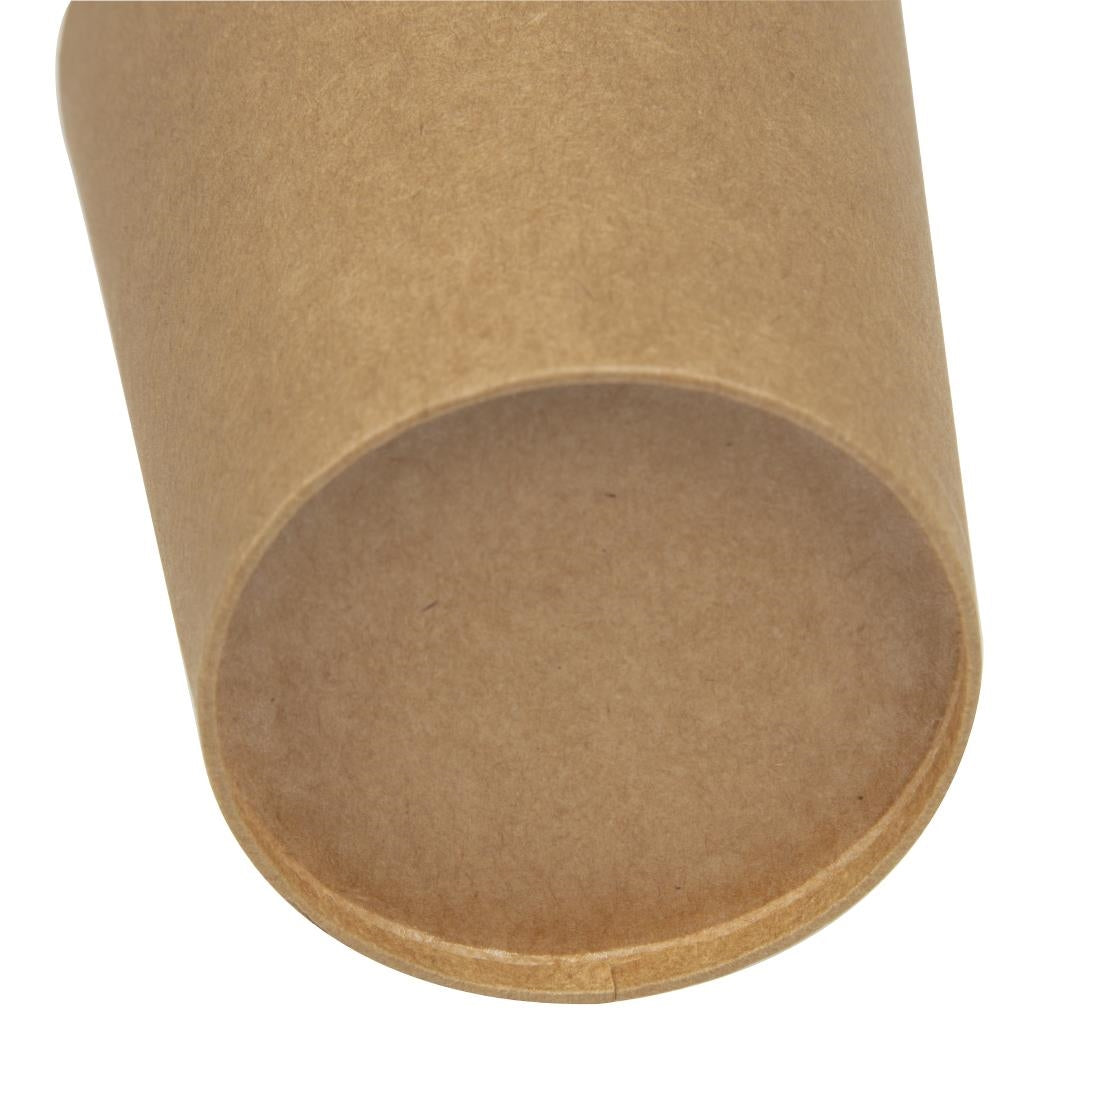 Colpac Recyclable Kraft Wrap Scoops (Pack of 1000) JD Catering Equipment Solutions Ltd